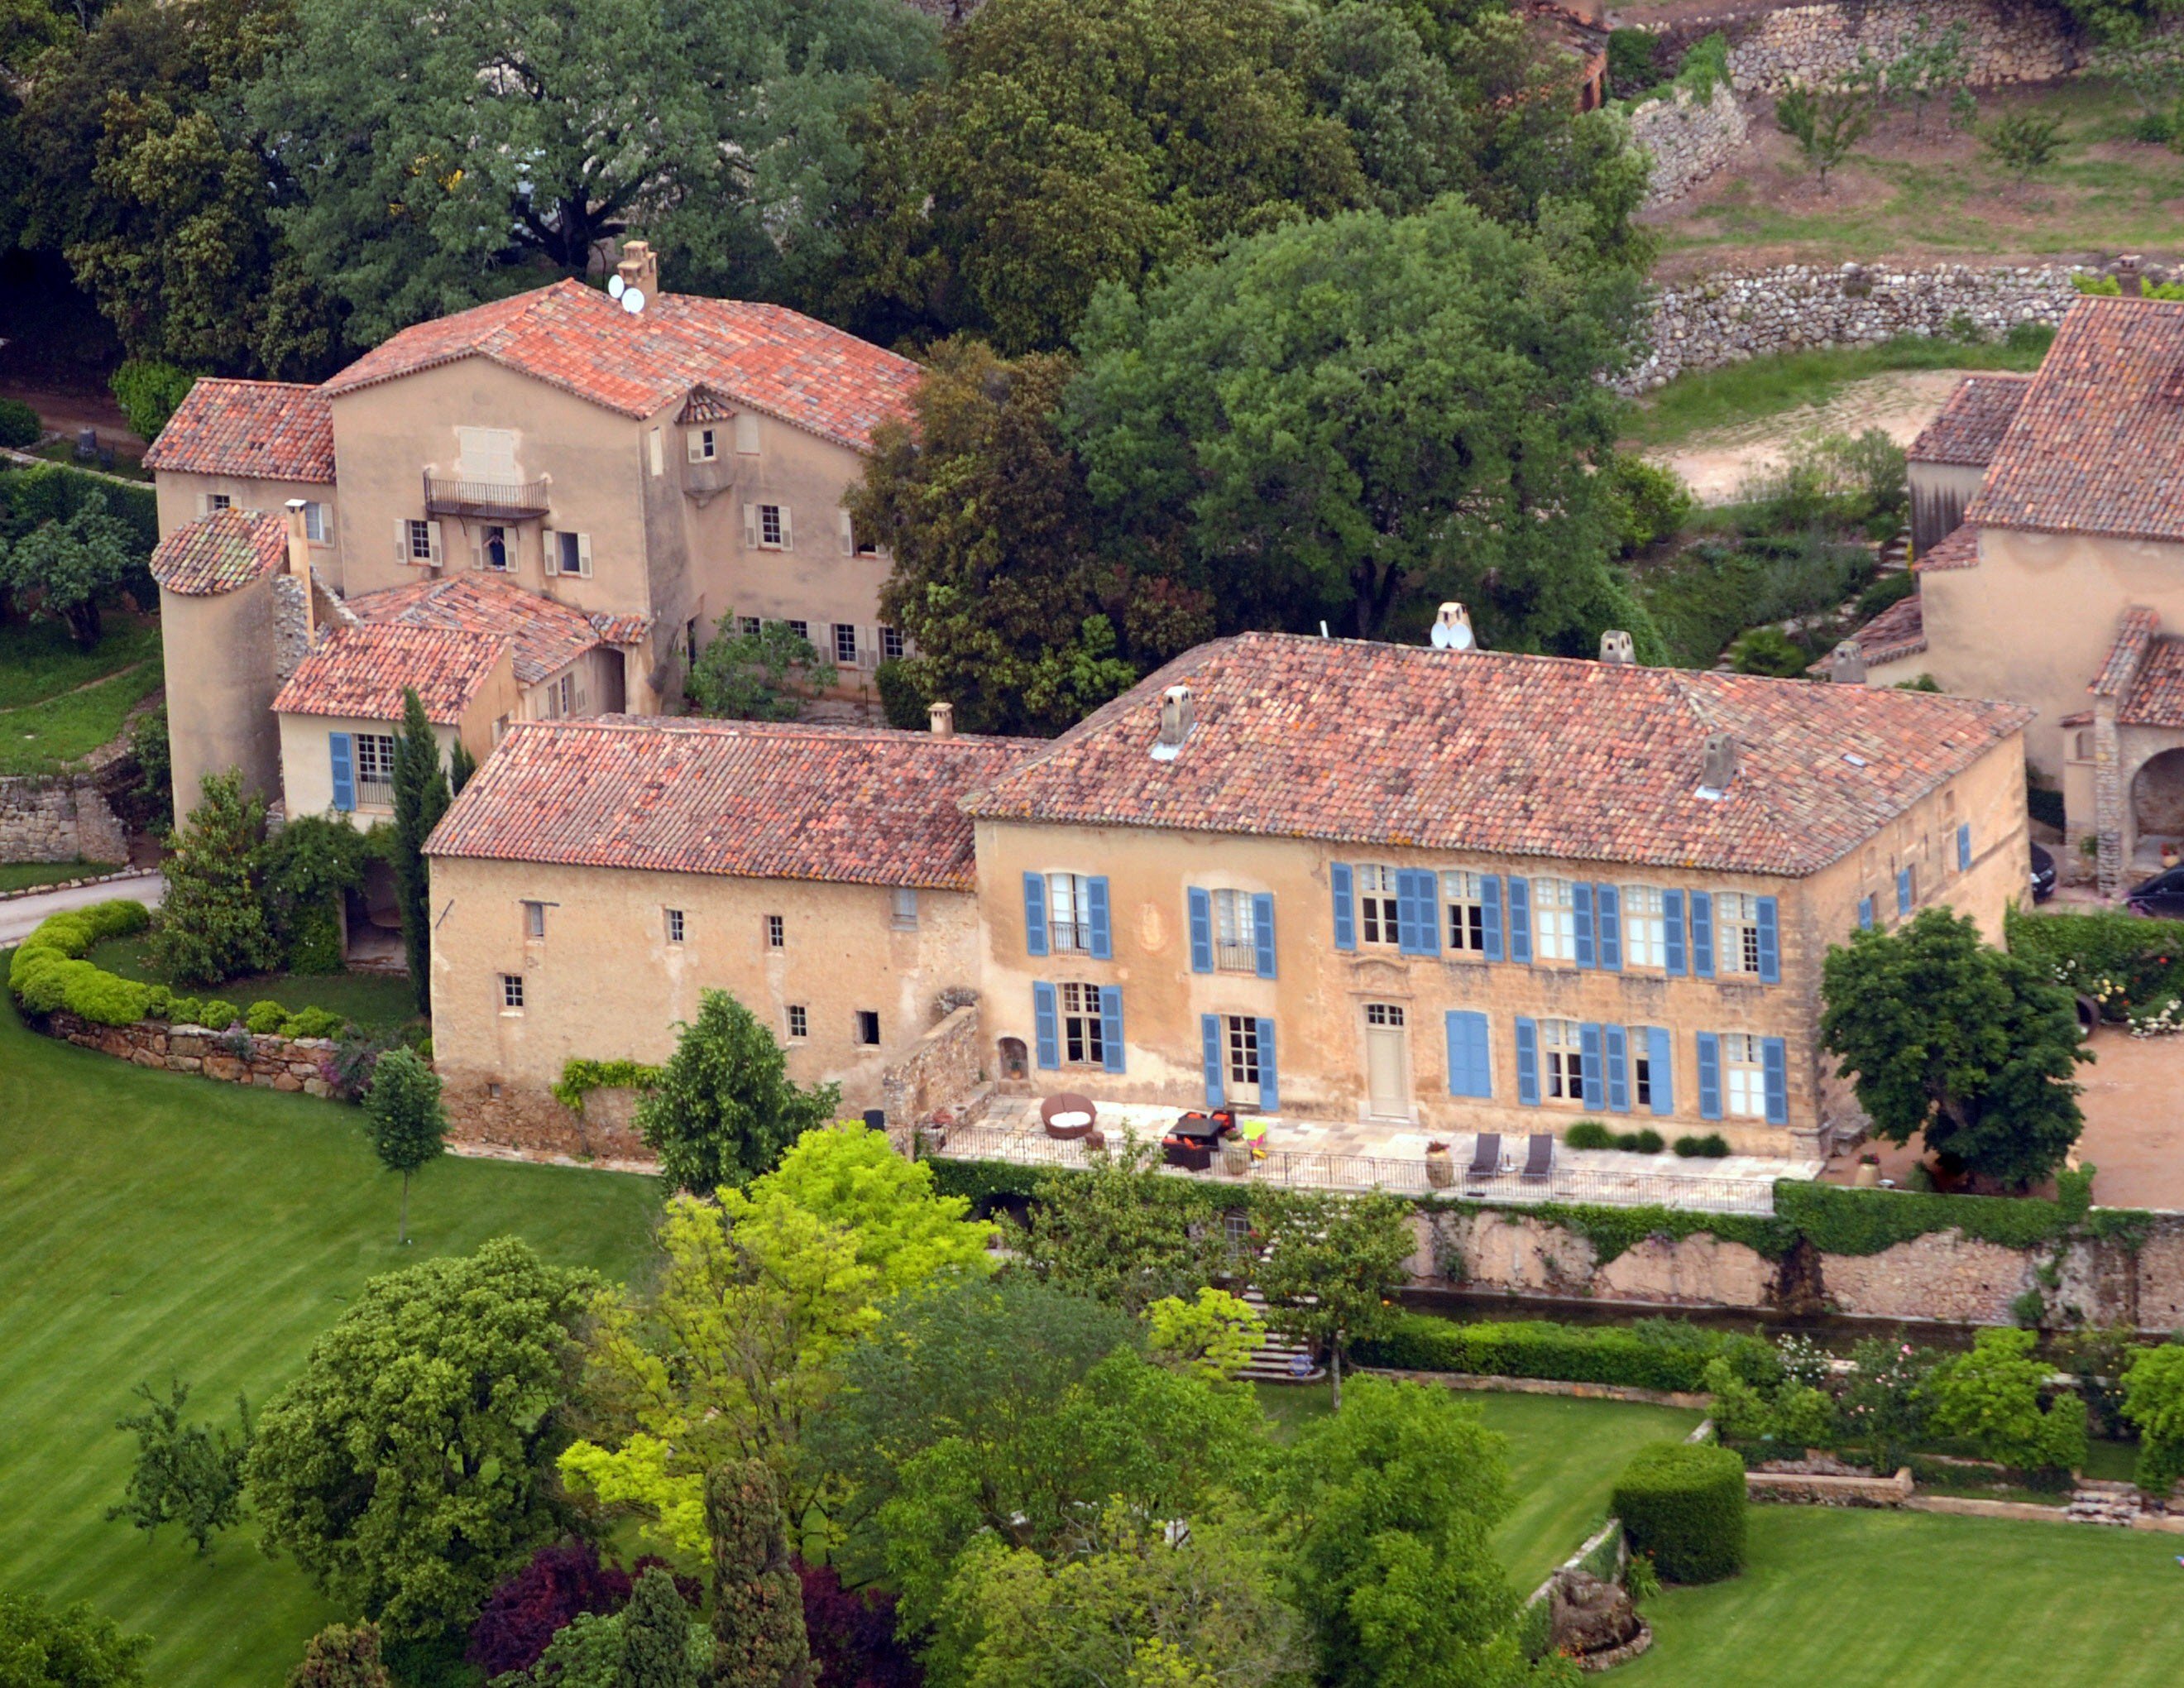 An aerial view of Le Val, southeastern France, shows the Chateau Miraval, a vineyard estate of actors Brad Pitt and Angelina Jolie | Source: Getty Images